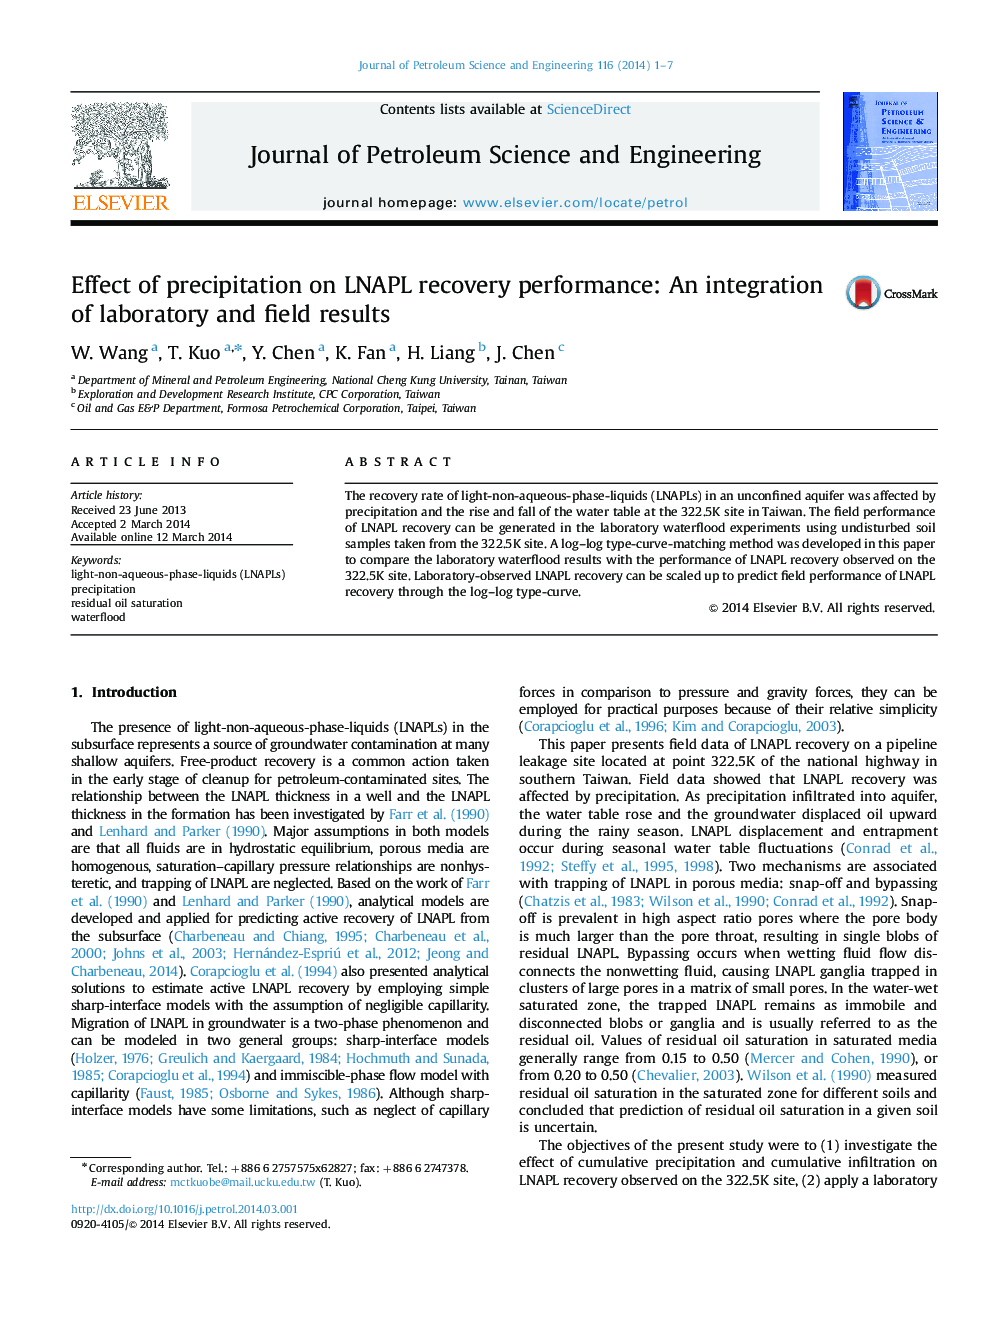 Effect of precipitation on LNAPL recovery performance: An integration of laboratory and field results